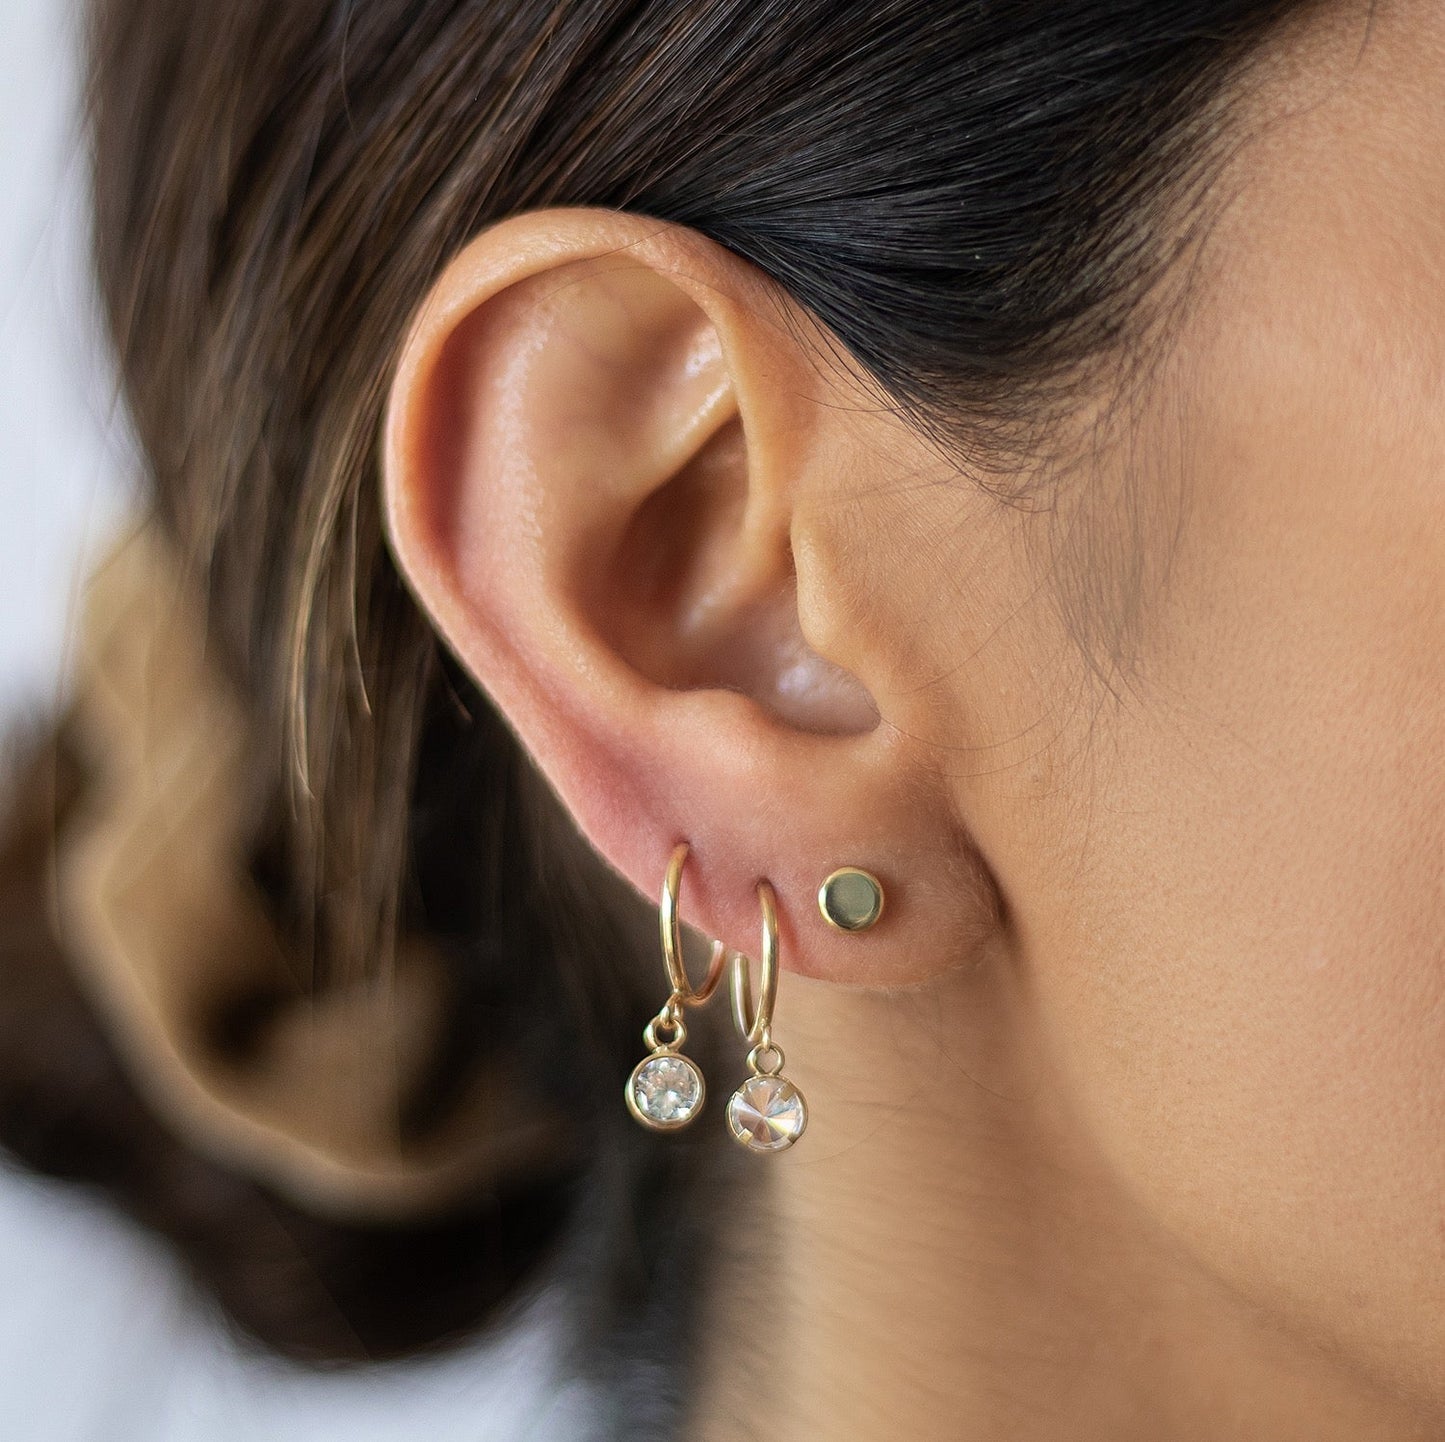 10k gold hoop earrings with charm,Our gold hoop earrings are a perfect way to add a little sophistication to your look. Beautiful, yet edgy and non-traditional, these hoops make for an interesting accessory 